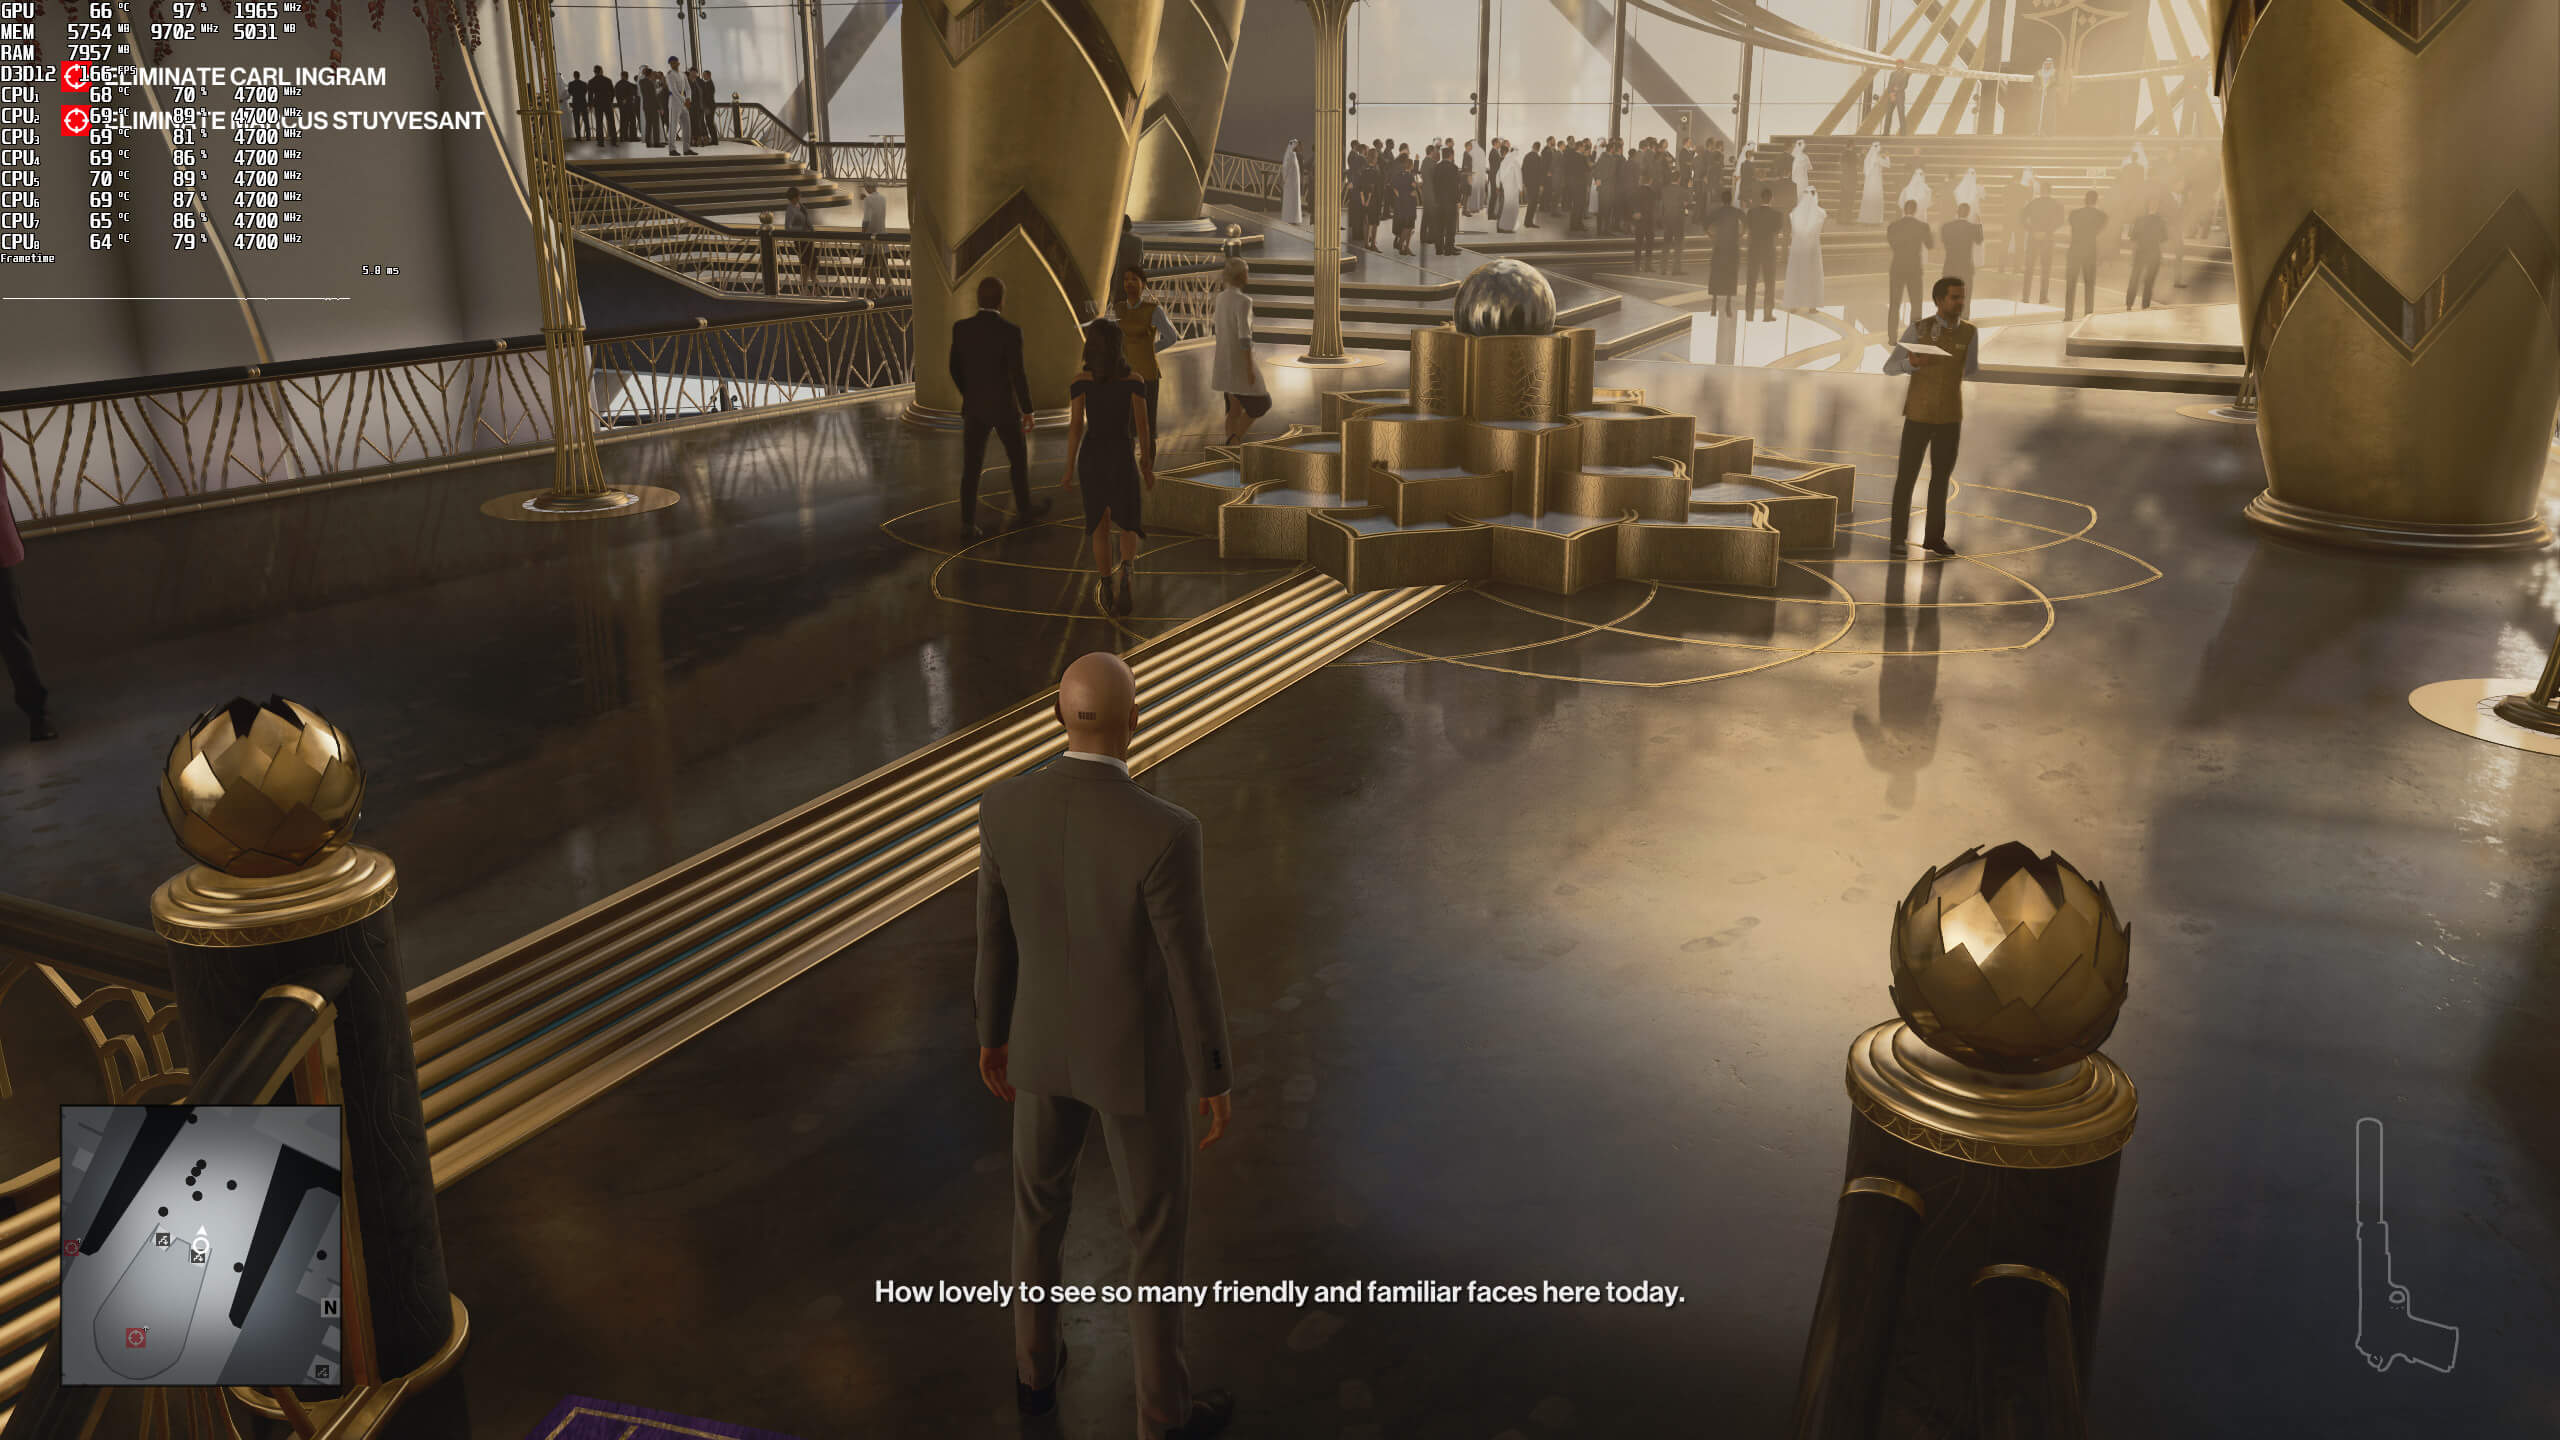 Hitman 3 update adds ray tracing, Nvidia DLSS, and AMD FSR